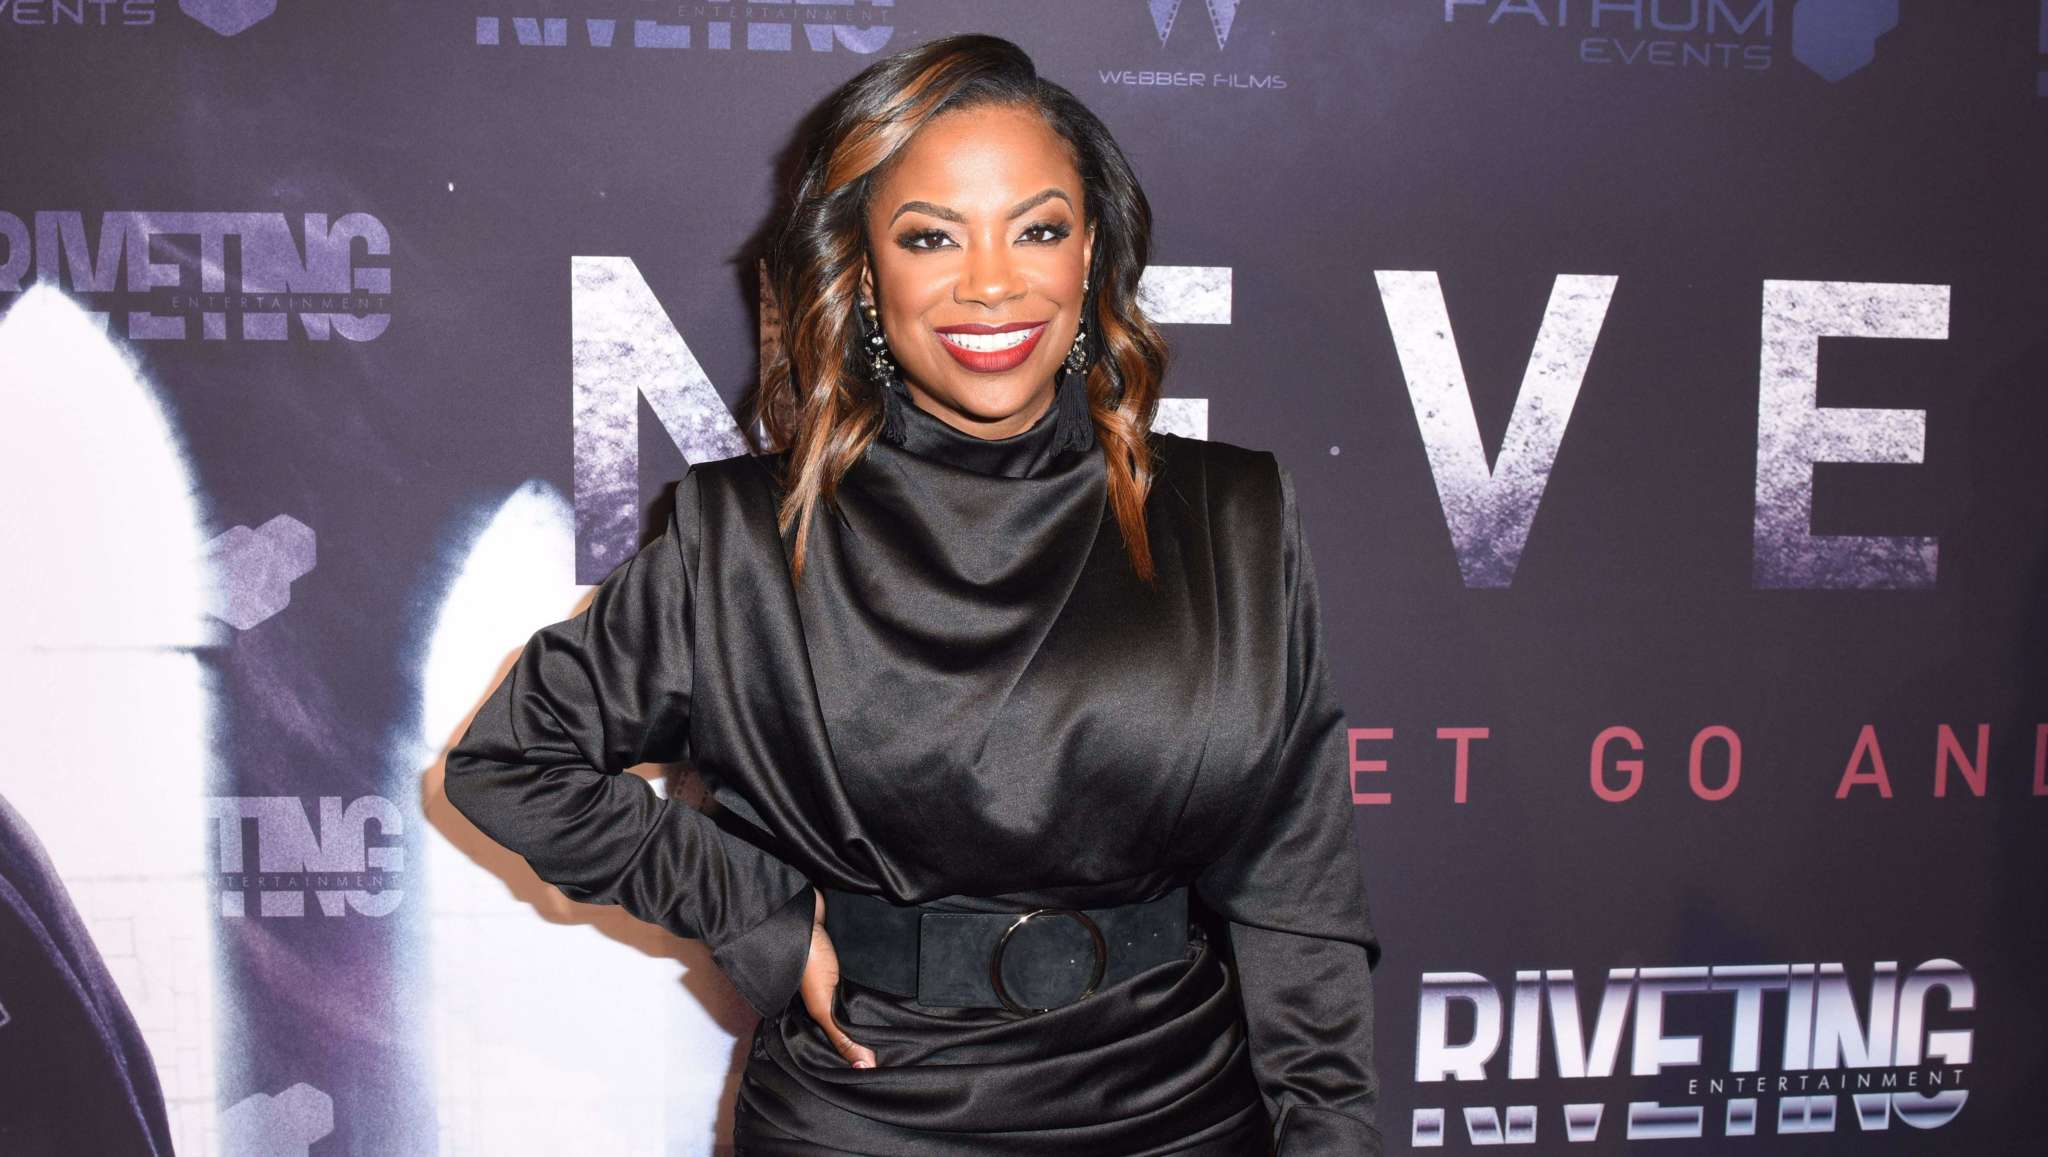 Kandi Burruss Wishes A Happy Birthday To Her Homie - See The Sweet Pics She Shared